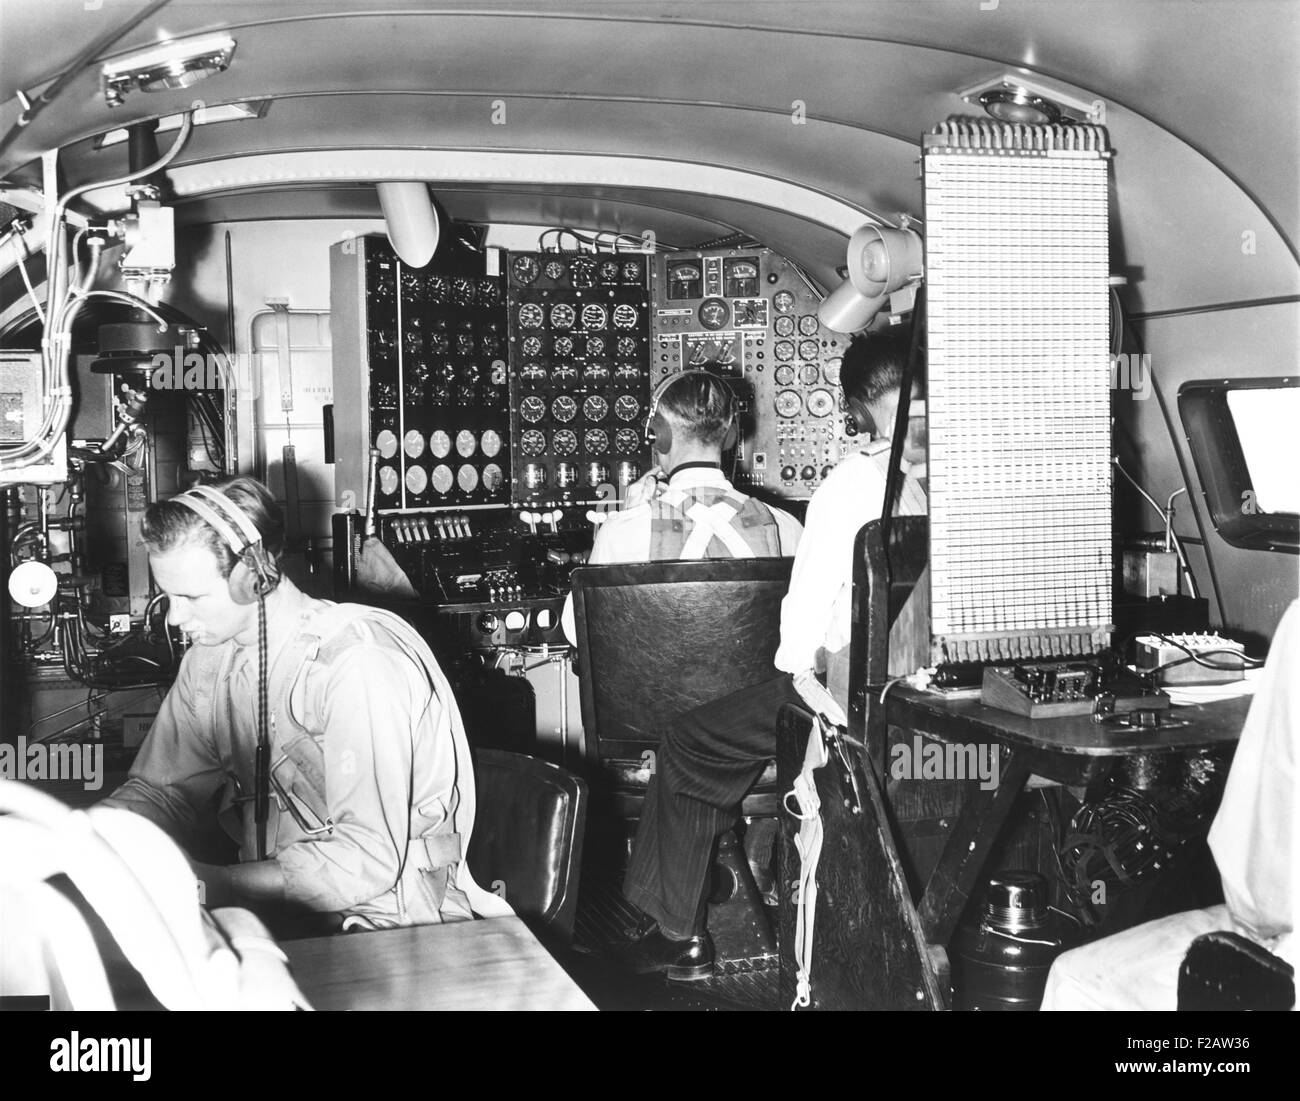 In the cabin of the 82-ton Douglas B-19, the world's largest bomber. Nov. 13, 1941. L-R: the radioman, the flight engineer at the complex 'dashboard,' and a representative from the Wright Duplex – Cyclone Motor Company. The flying battleship was powered by four 2000 horse power Wright Duplex Cyclone engines. (CSU 2015 11 1456) Stock Photo